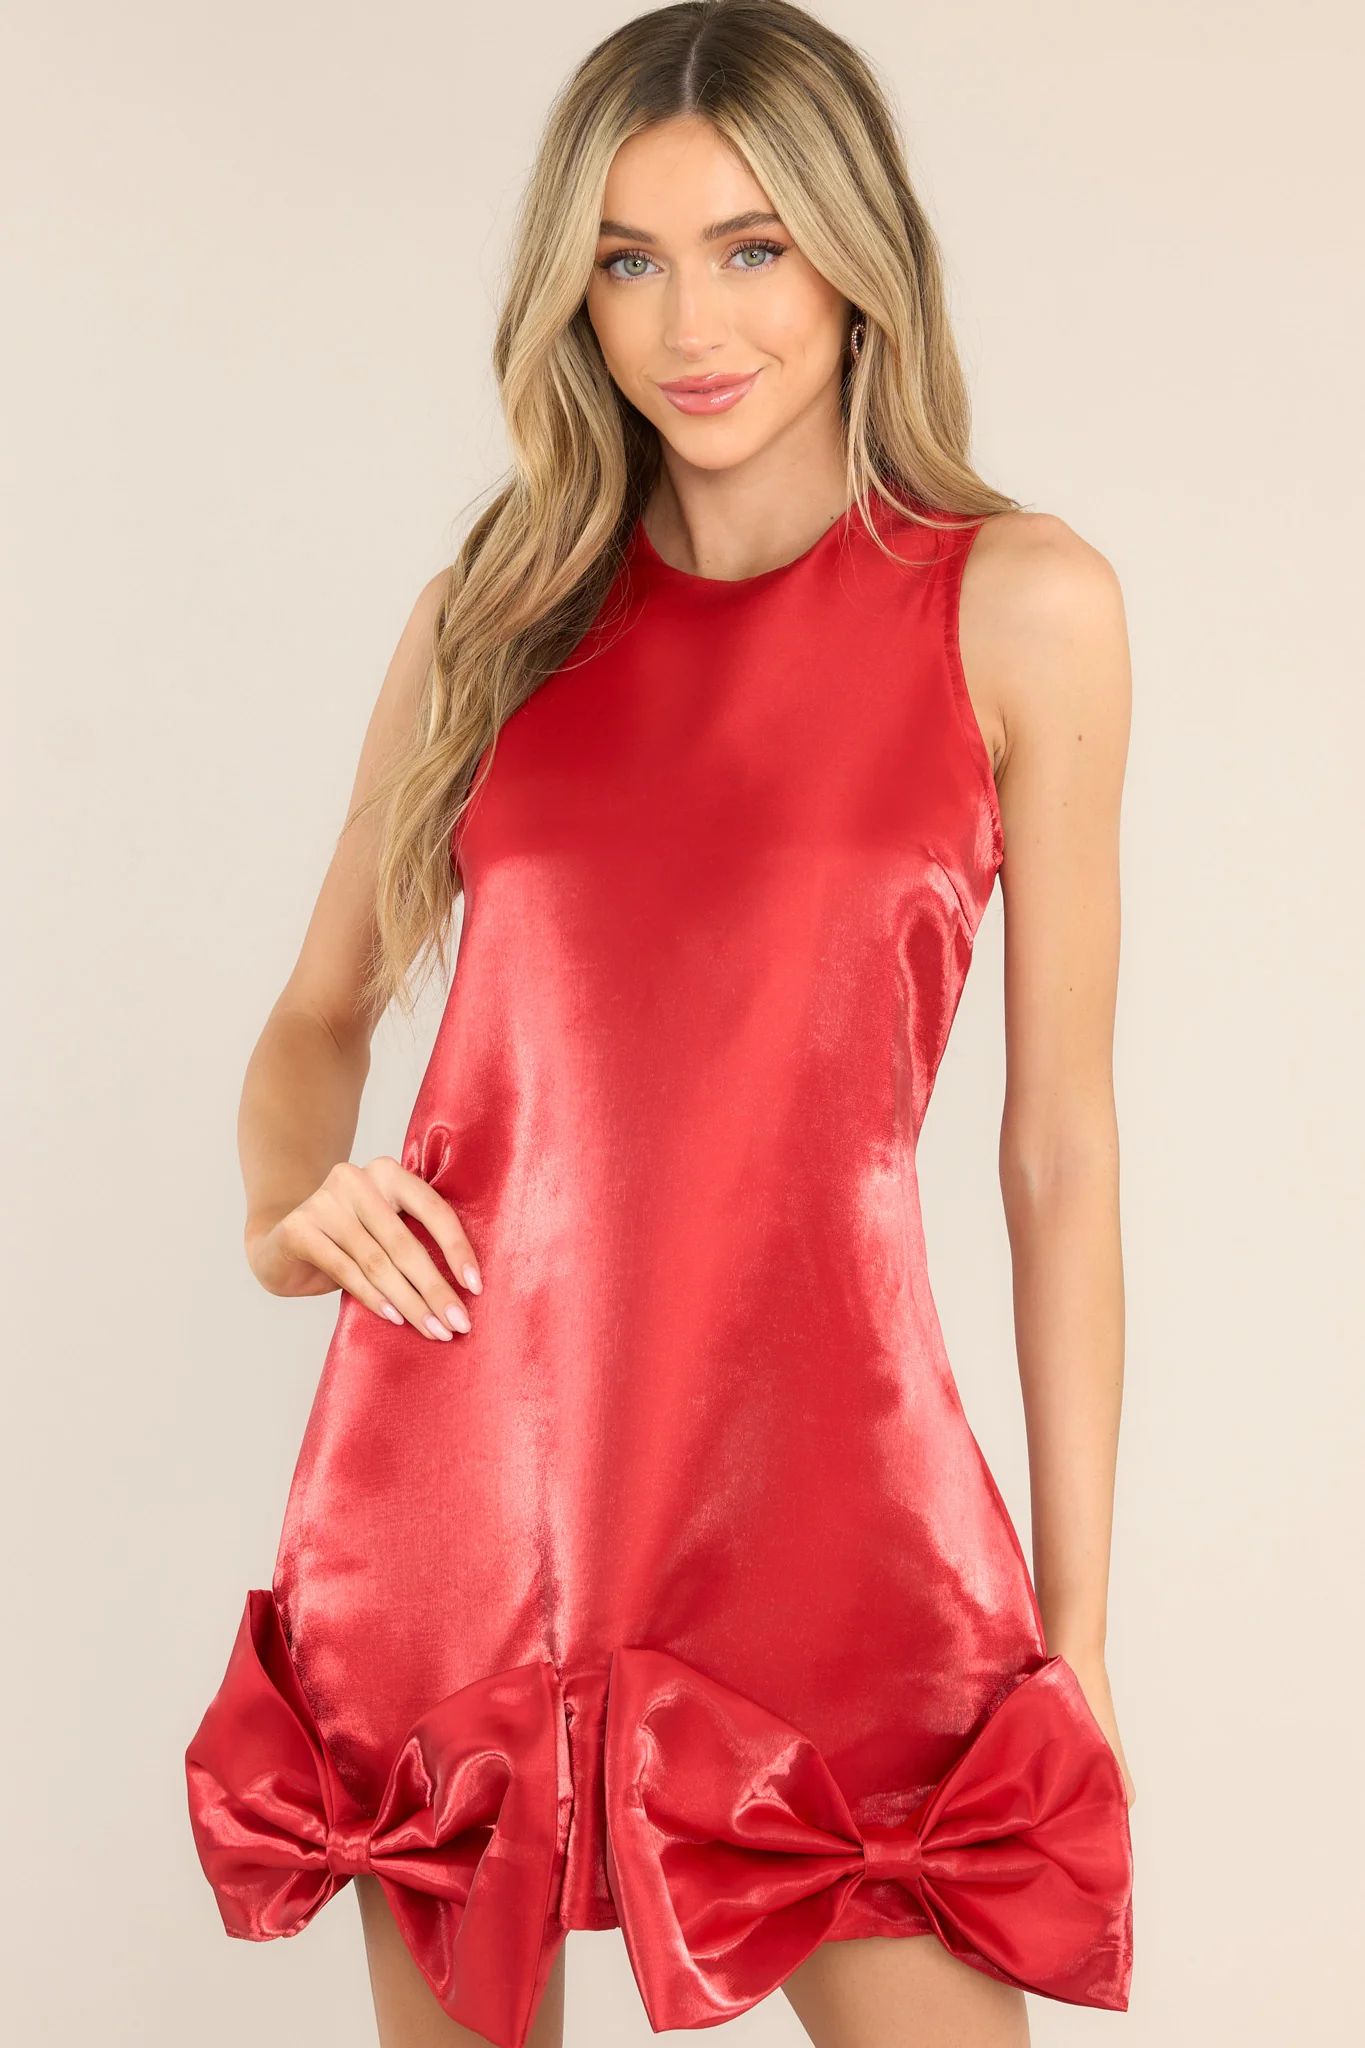 Your Eyes On Mine Red Mini Dress | Red Dress 